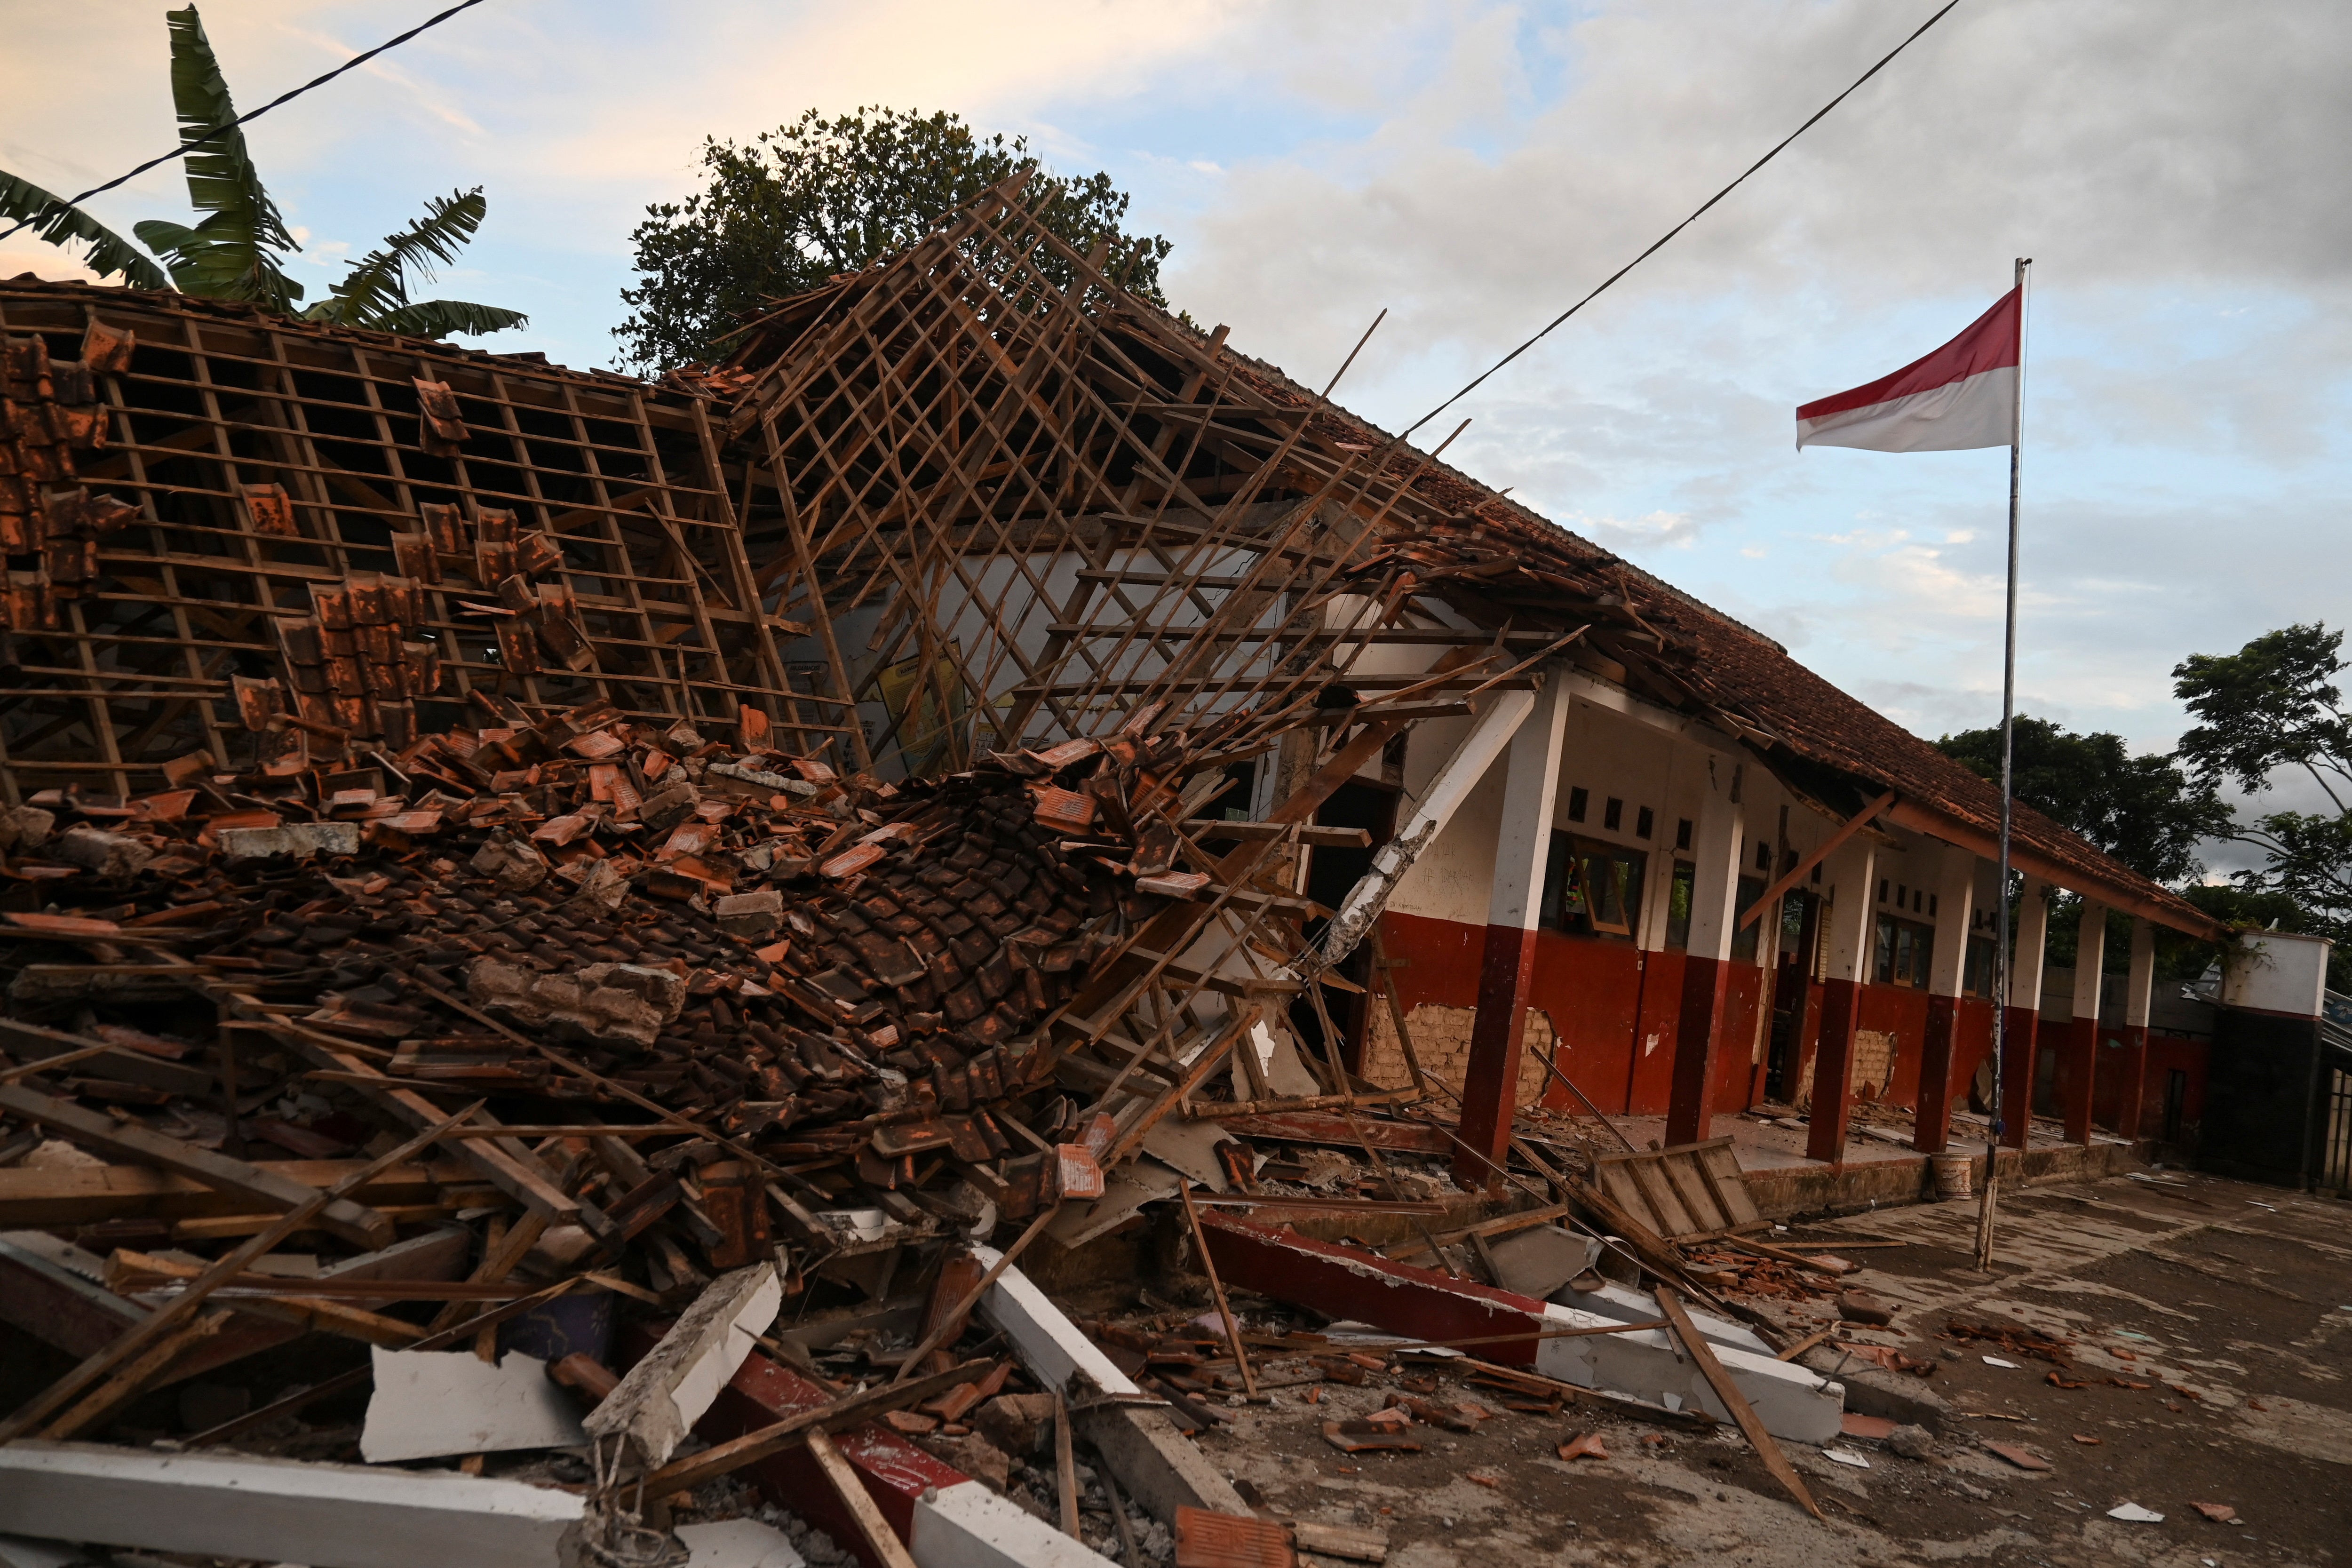 A collapsed school in Cianjur after the earthquake